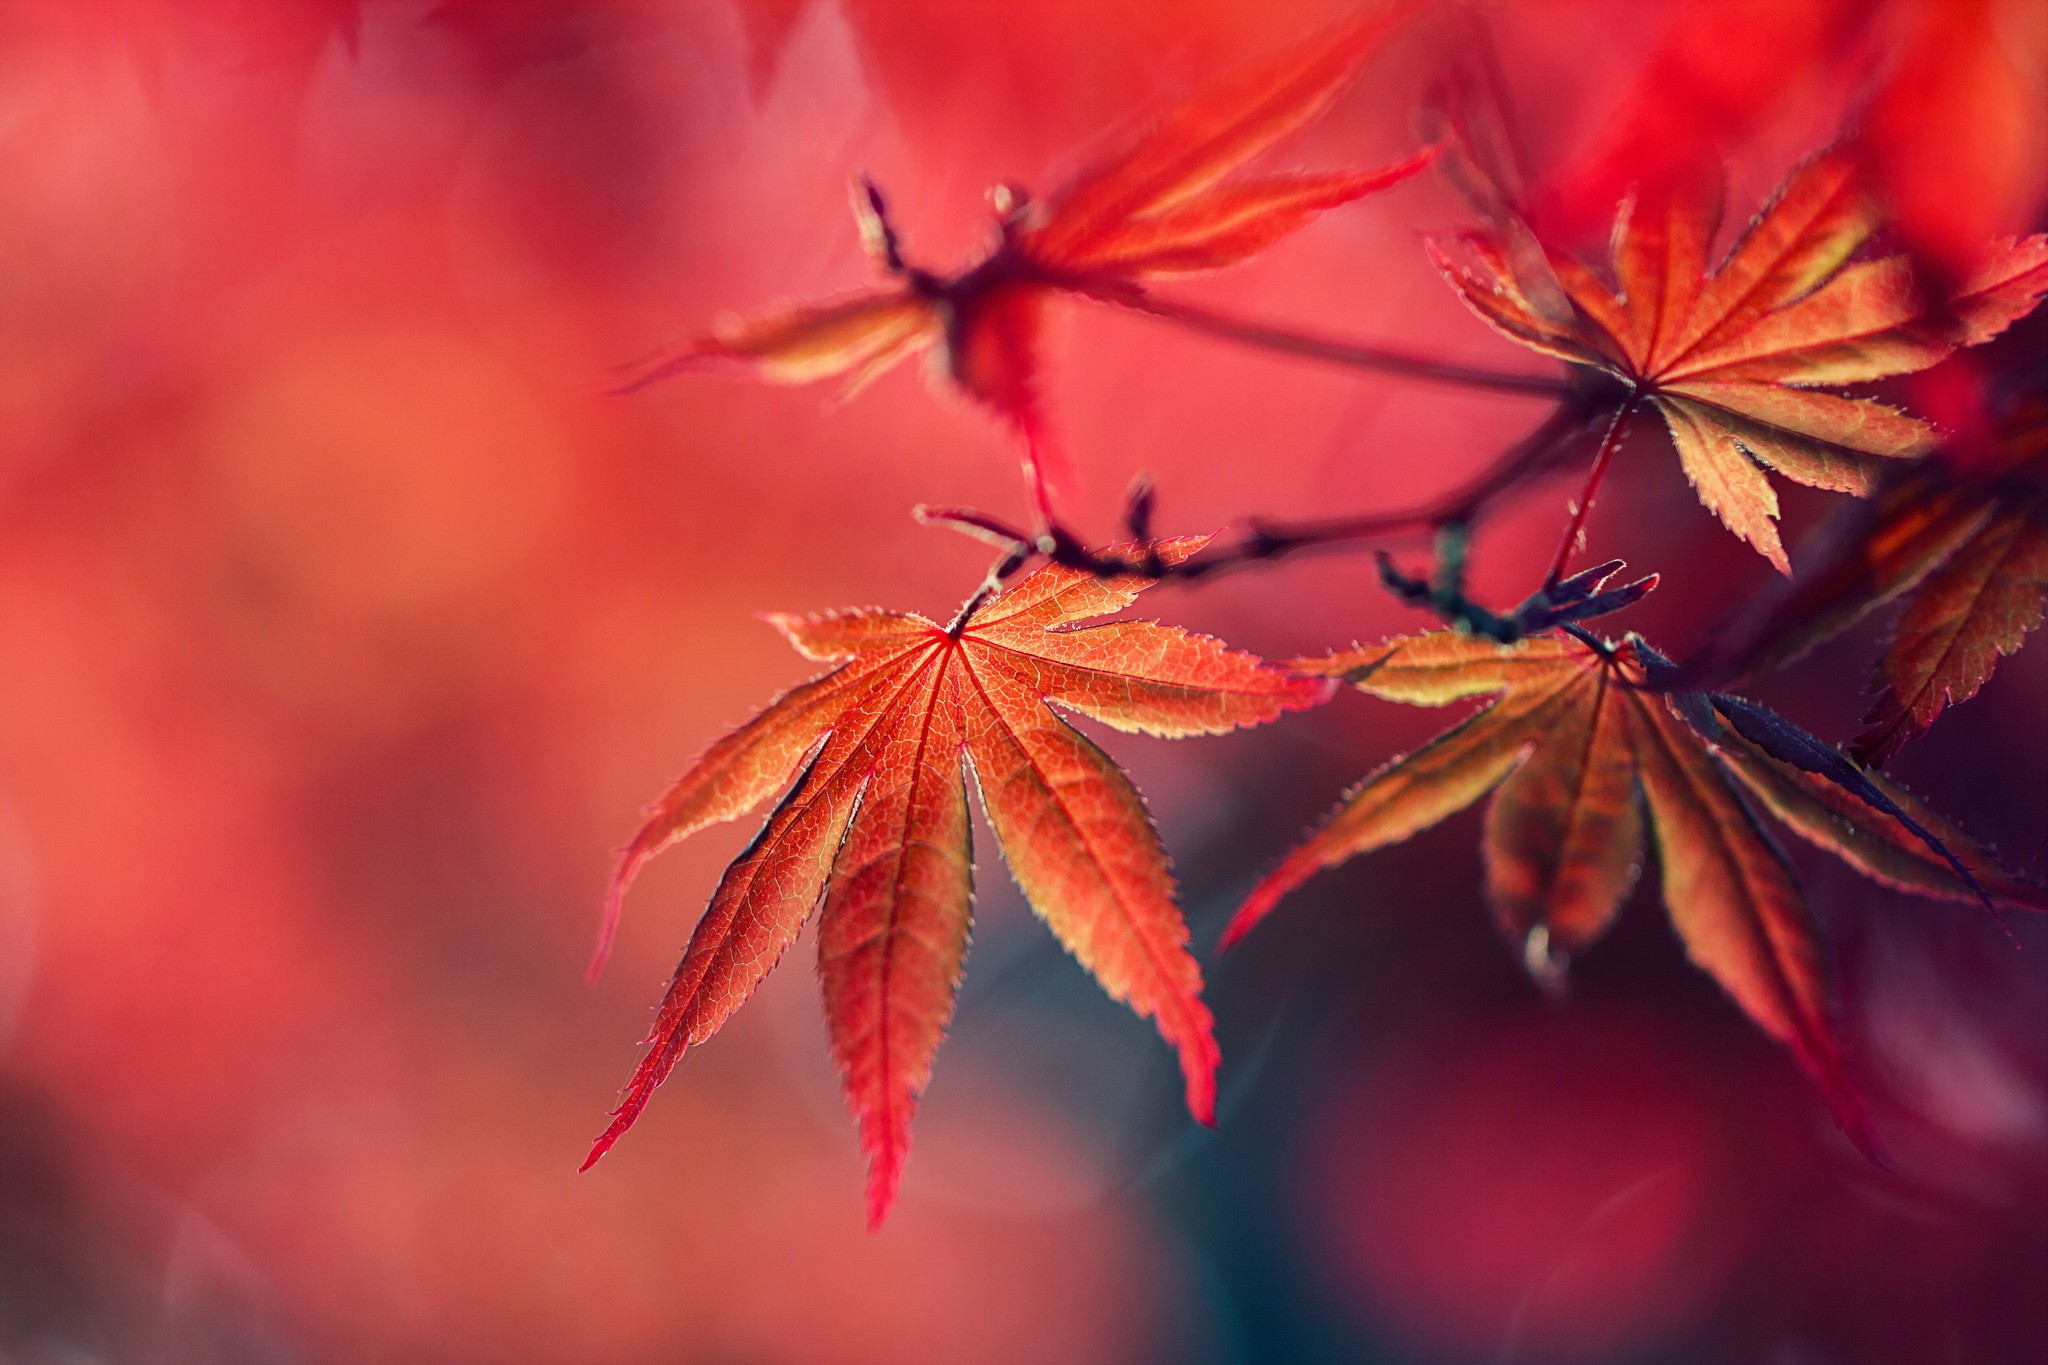 General 2048x1365 plants macro leaves red leaves fall red red background